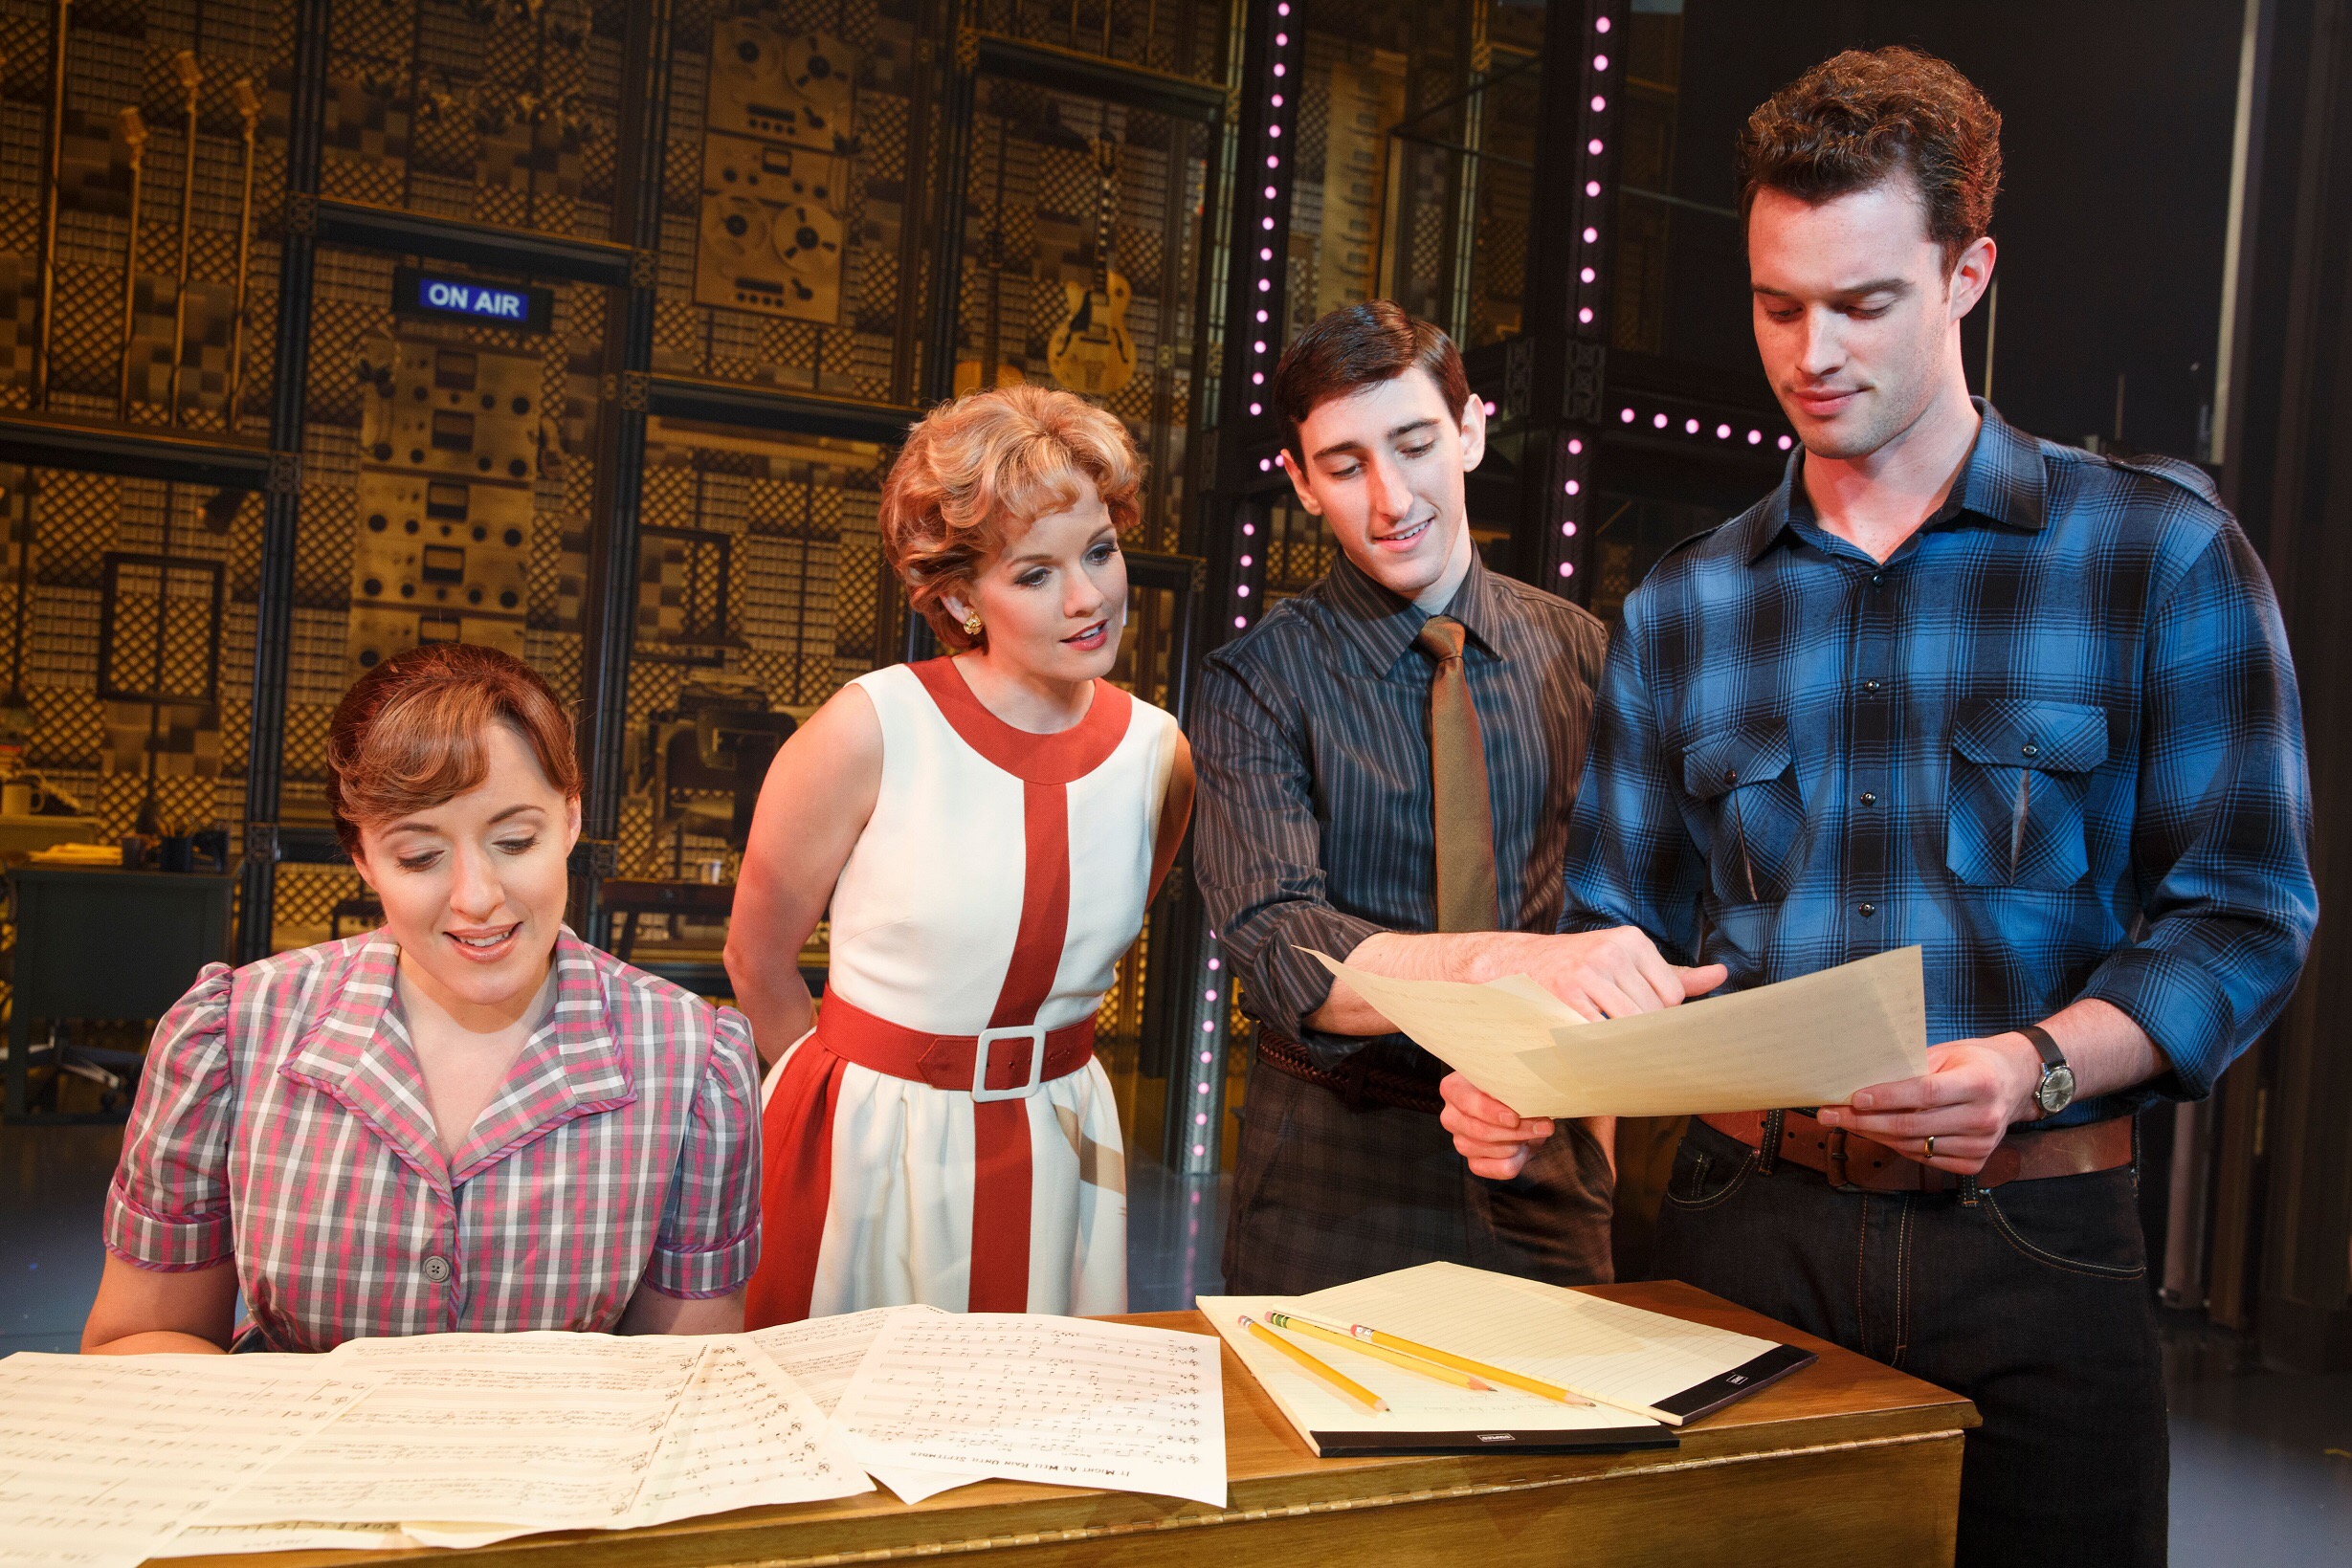 Curt Bouril ("Don Kirshner"), Liam Tobin ("Gerry Goffin"), Abby Mueller ("Carole King"), and Becky Gulsvig ("Cynthia Weil").